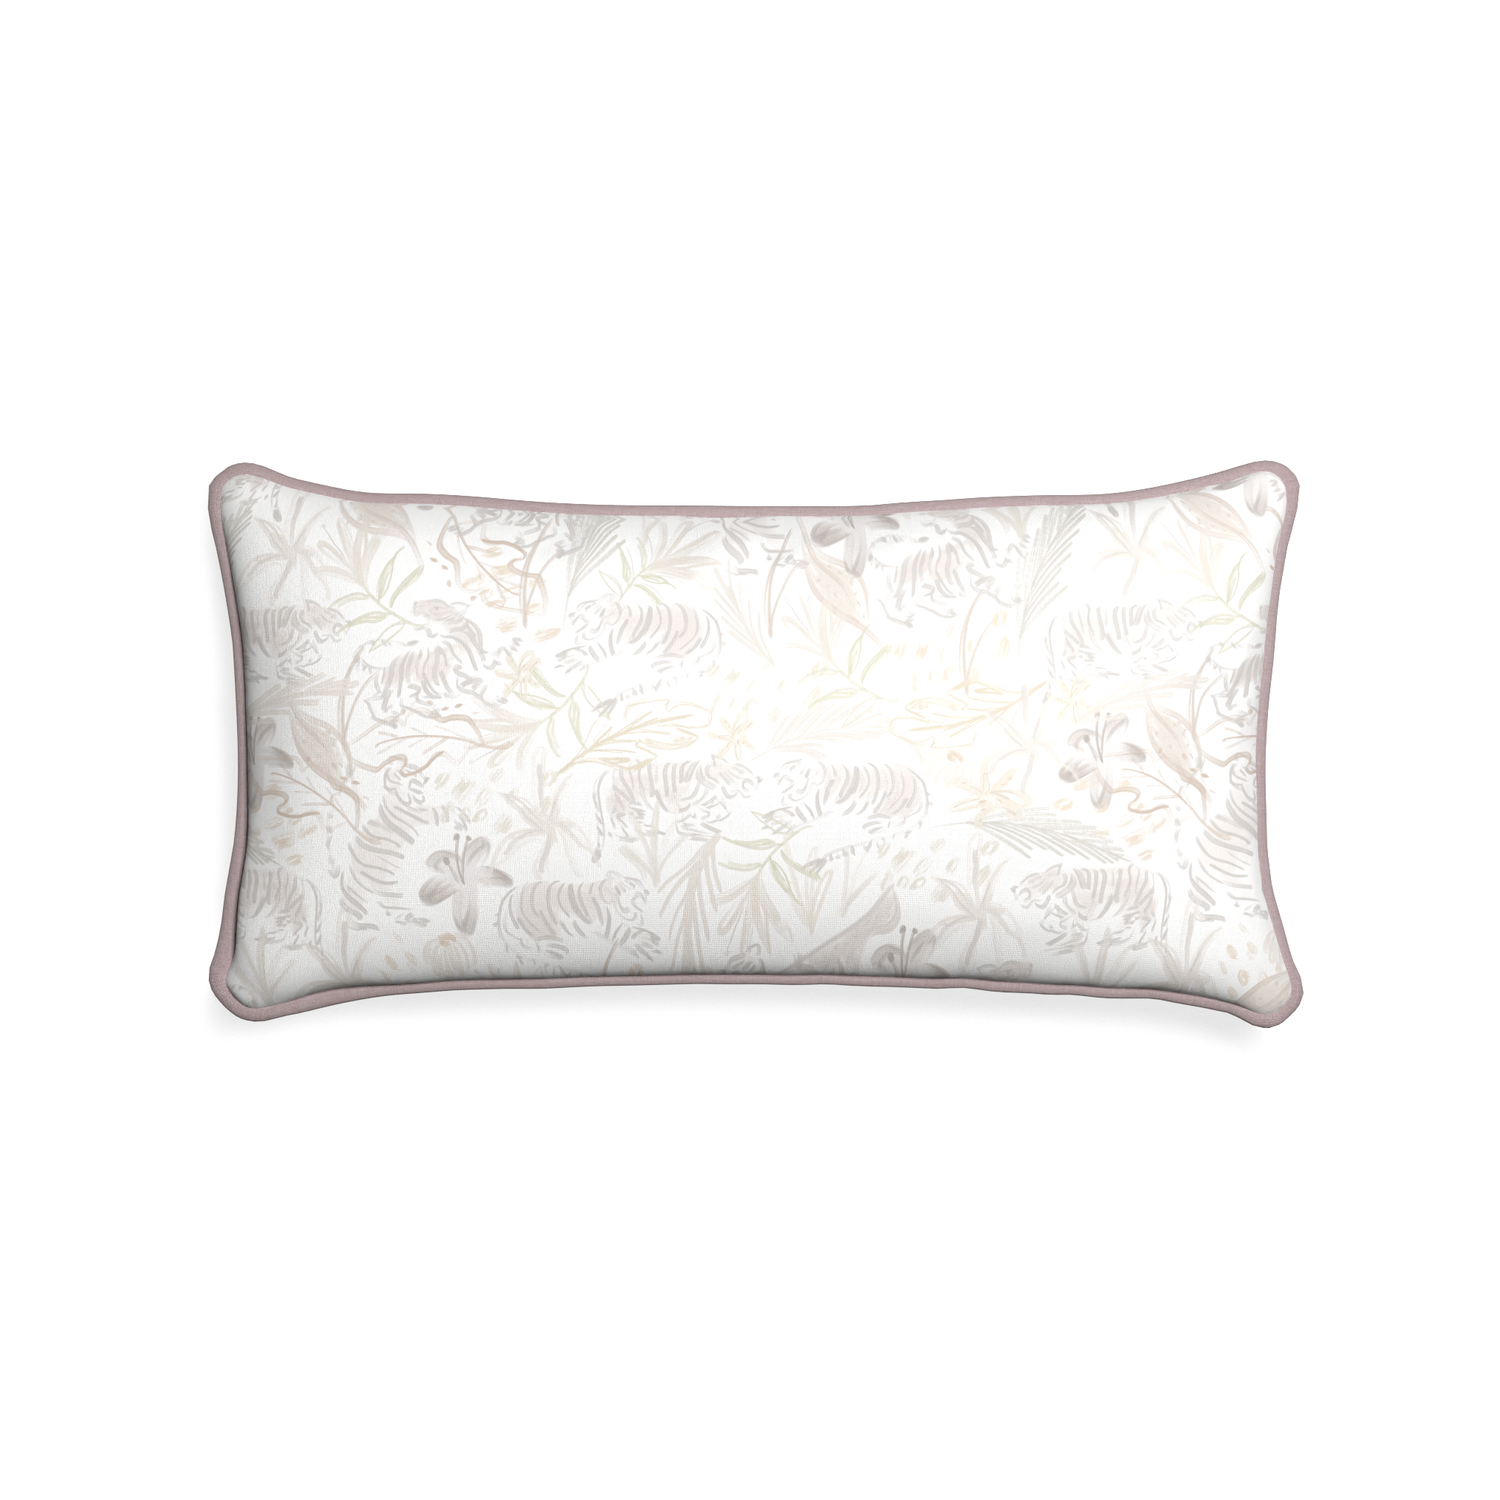 Midi-lumbar frida sand custom beige chinoiserie tigerpillow with orchid piping on white background